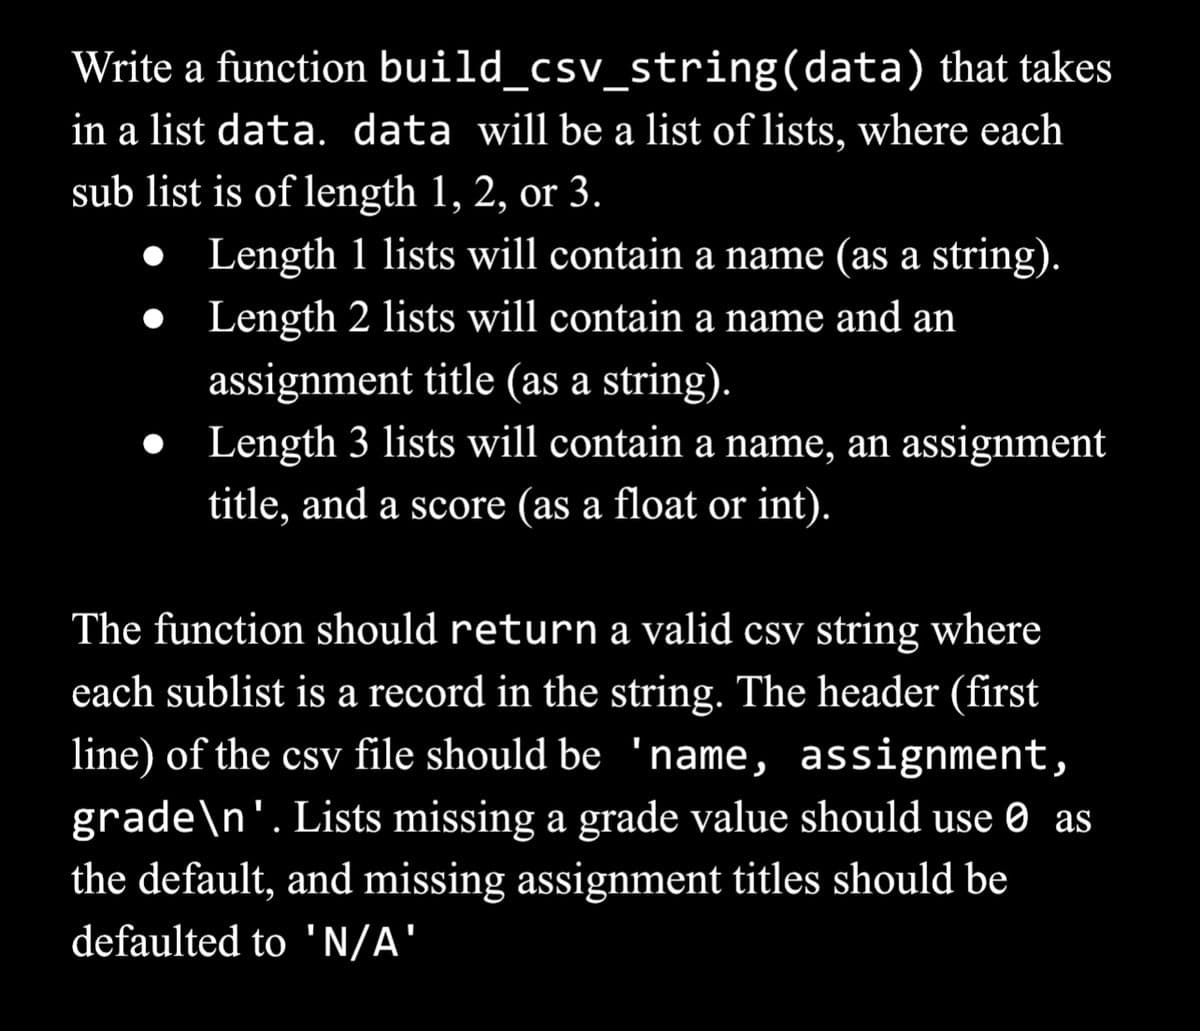 Write a function
build_csv_string(data) that takes
in a list data. data will be a list of lists, where each
sub list is of length 1, 2, or 3.
Length 1 lists will contain a name (as a string).
Length 2 lists will contain a name and an
assignment title (as a string).
● Length 3 lists will contain a name, an assignment
title, and a score (as a float or int).
The function should return a valid csv string where
each sublist is a record in the string. The header (first
line) of the csv file should be 'name, assignment,
grade\n'. Lists missing a grade value should use as
the default, and missing assignment titles should be
defaulted to 'N/A'